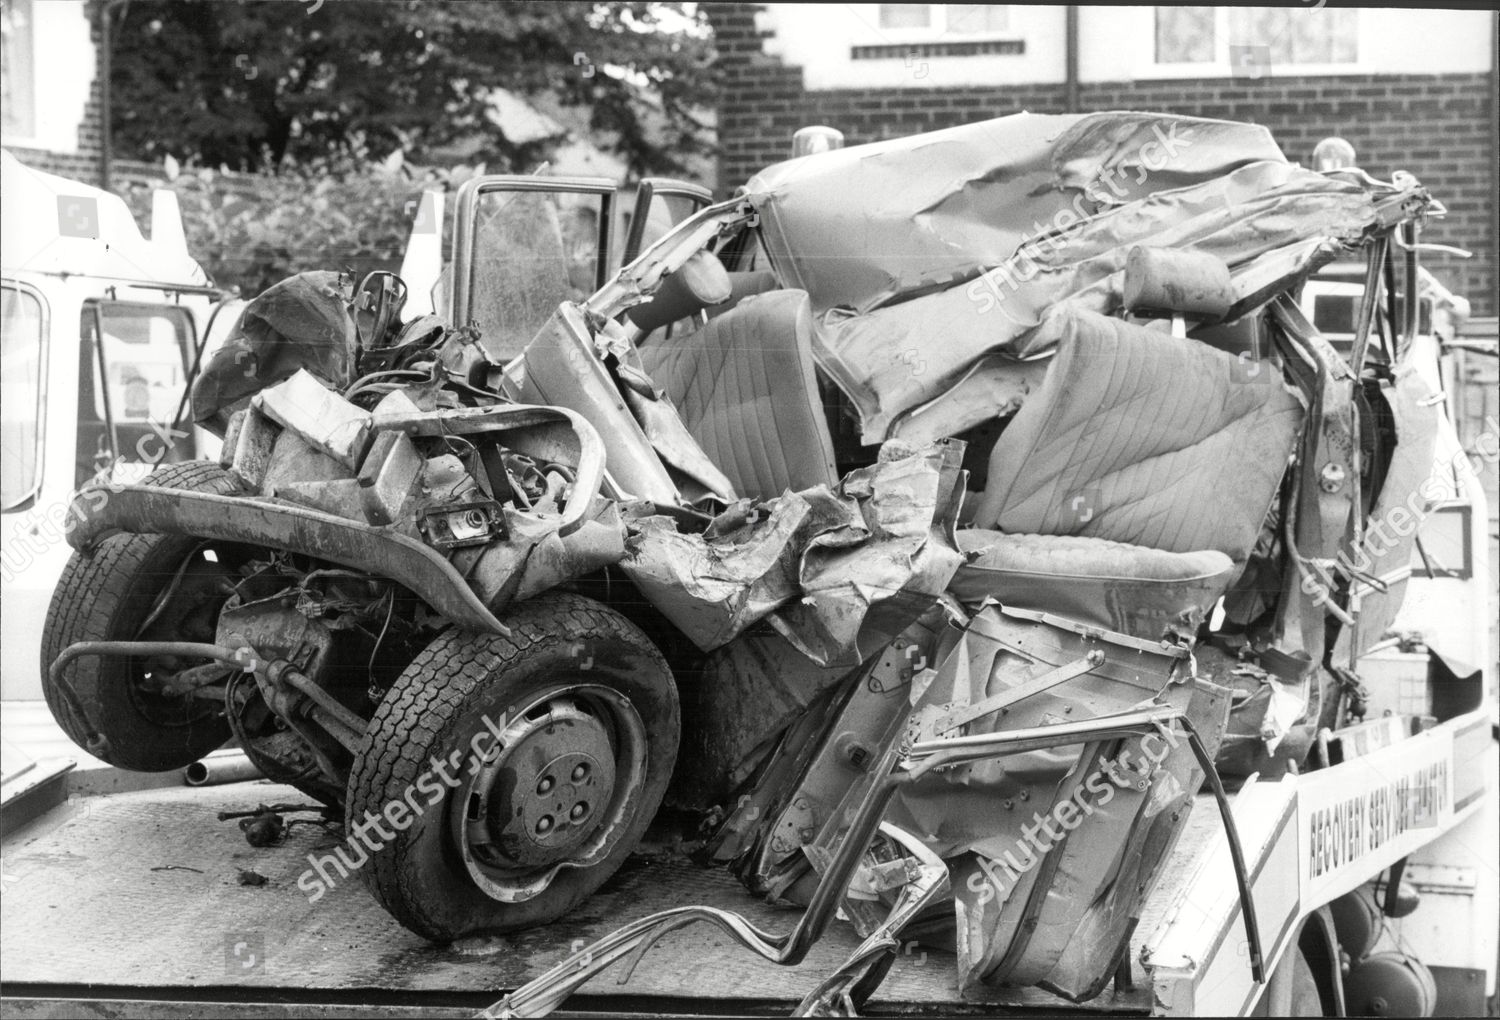 transport-accidents-motor-cars-double-death-crash-sowing-wrecked-triumph-dolomite-car-which-was-driven-and-crashed-by-a-boy-of-14-in-eccles-manchester-killing-two-12yo-passengers-shutterstock-editorial-1798589a.jpg